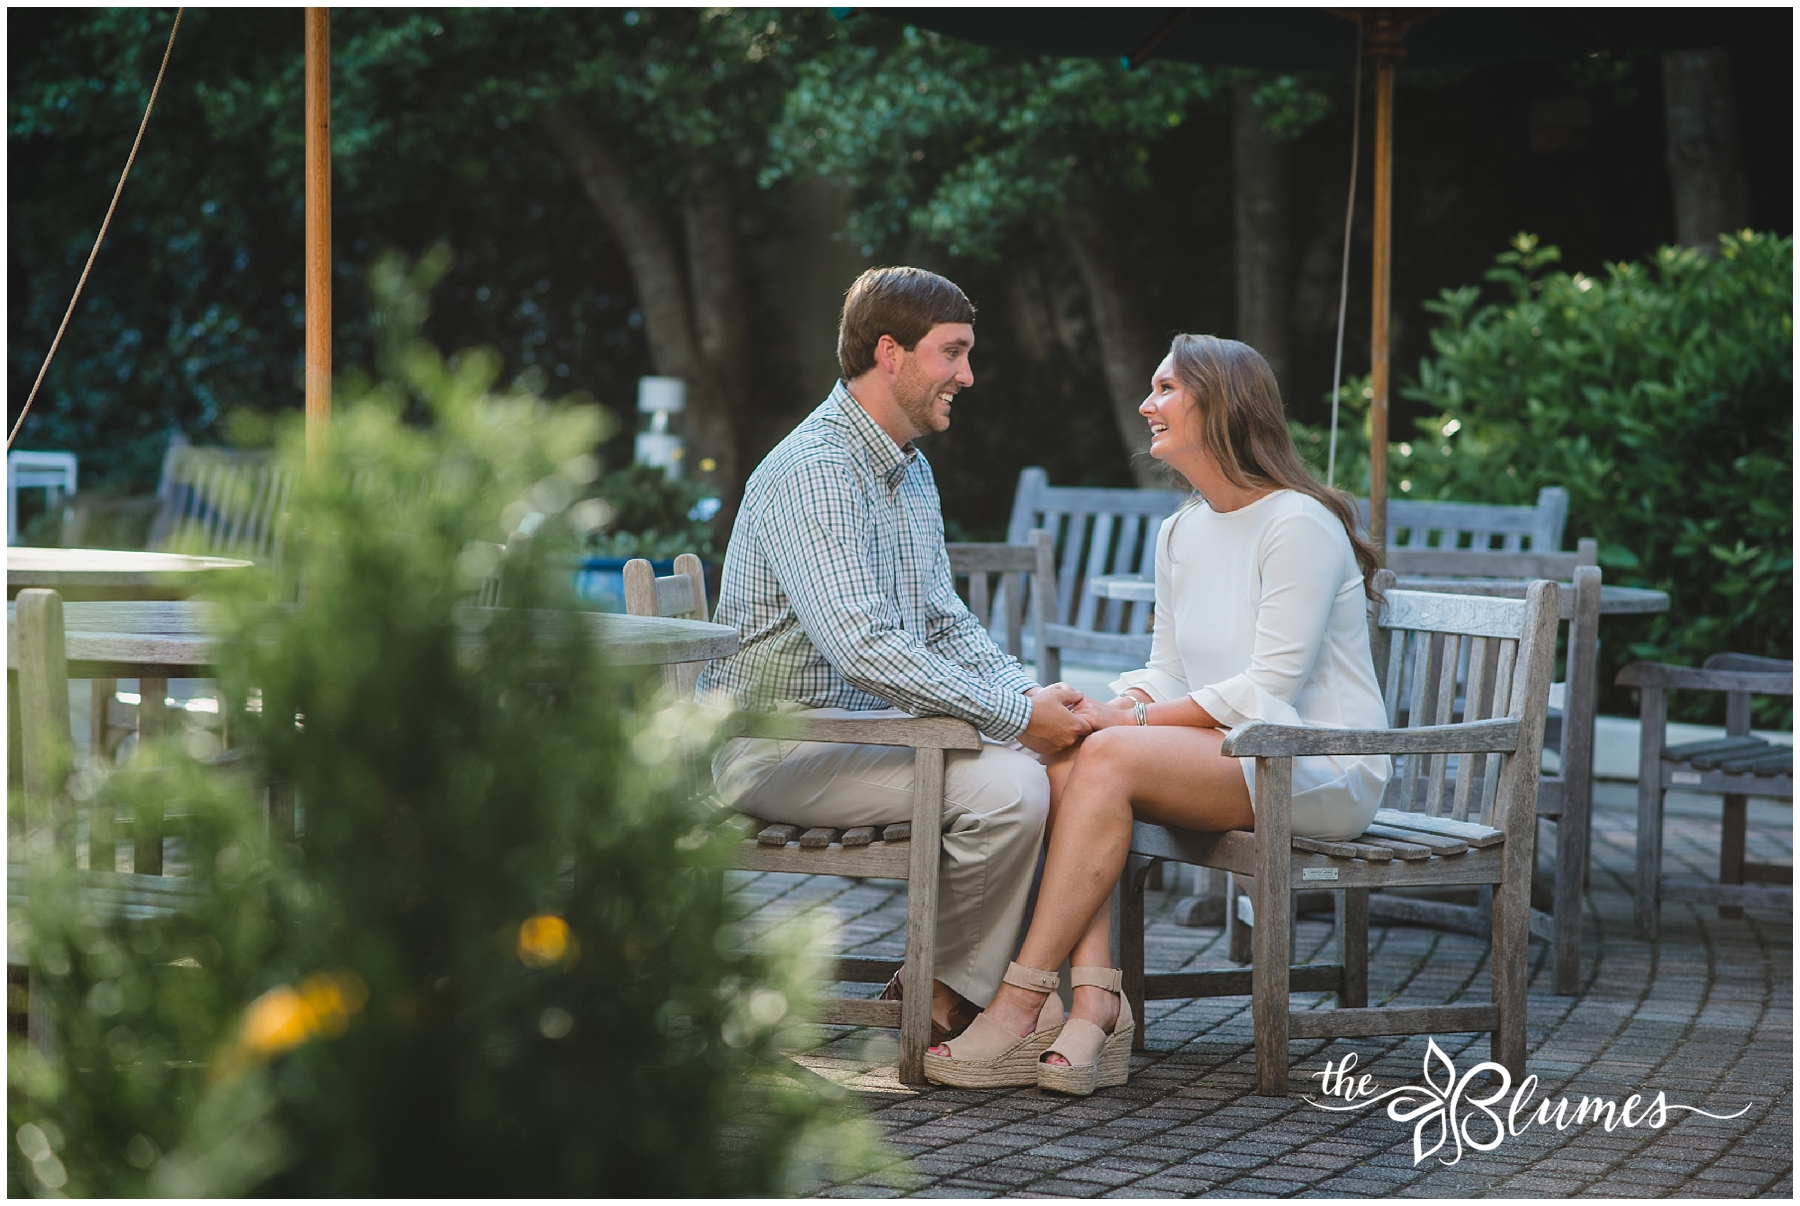 Unique And Fun Engagement Photos At The Uga State Botanical Garden